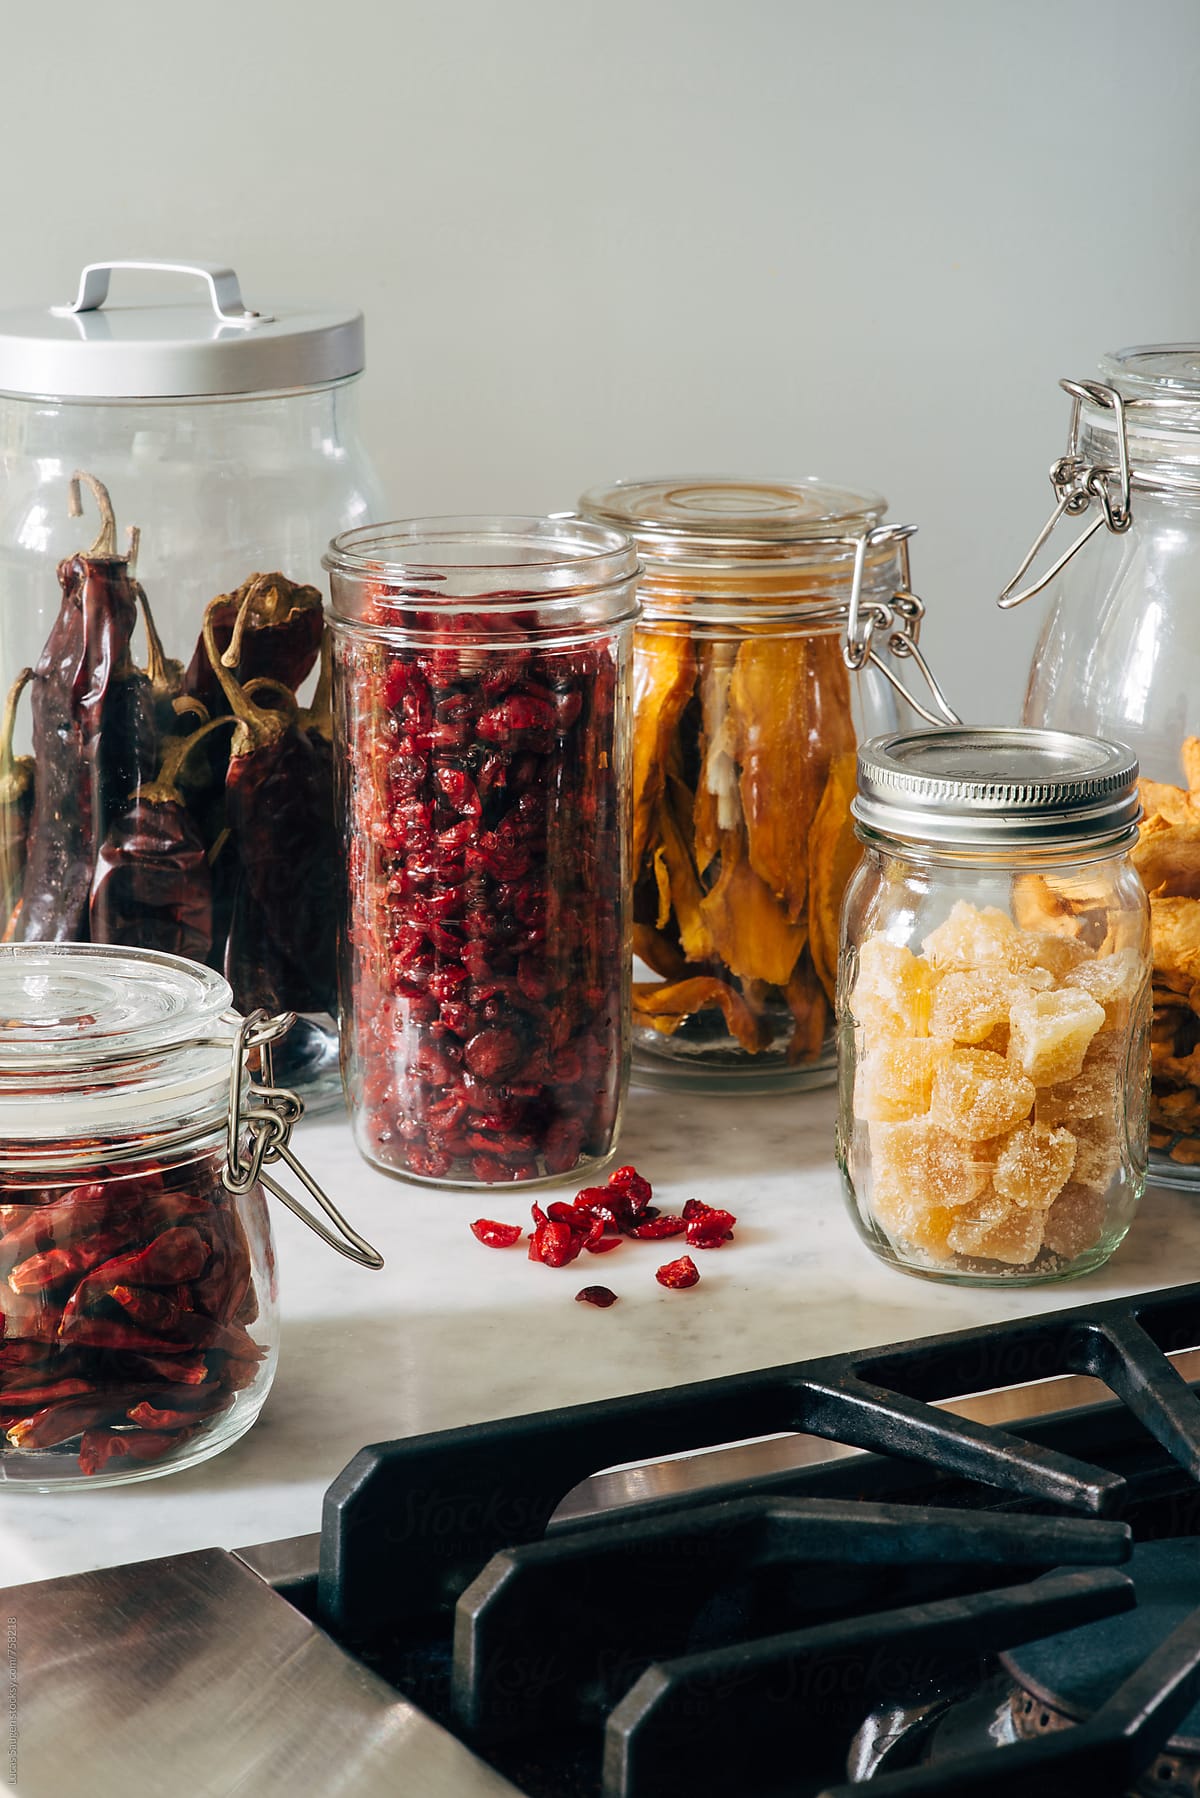 A collection of jar with dried fruits sitting on a counter top next to a stove in a kitchen.